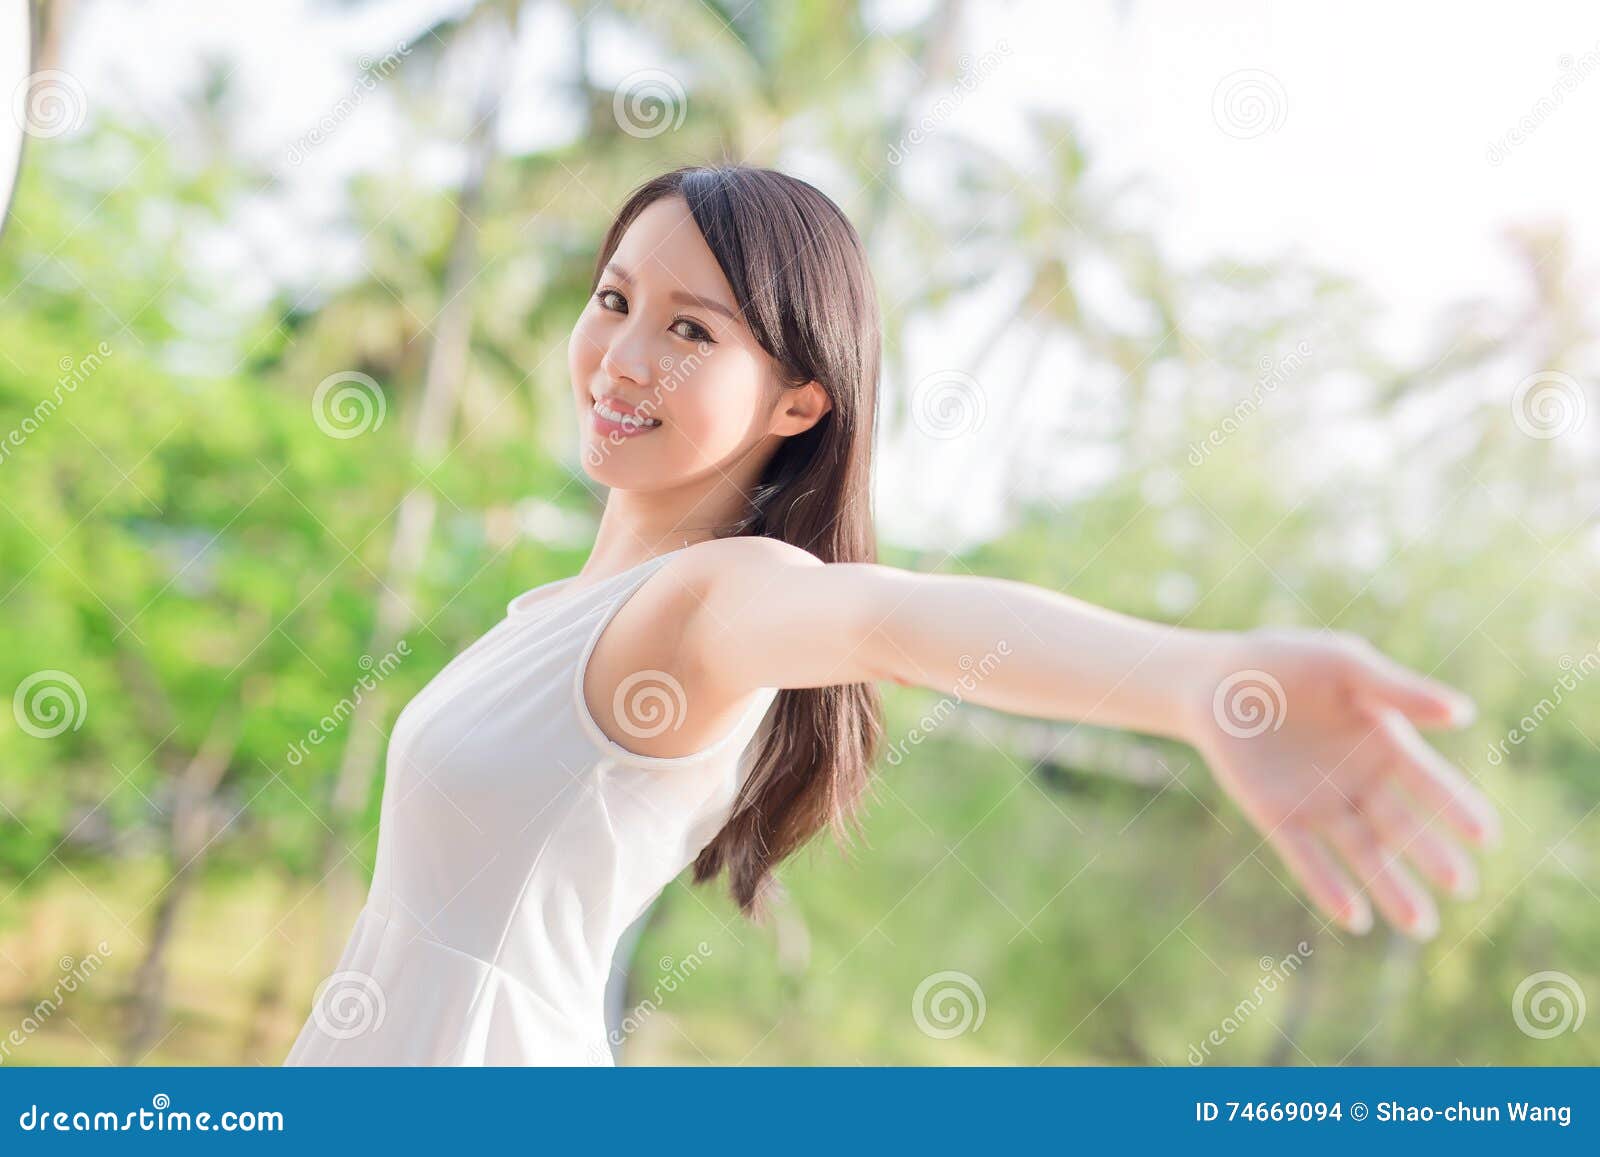 Young Woman Raising Her Arms Stock Photo - Image of health, carefree ...